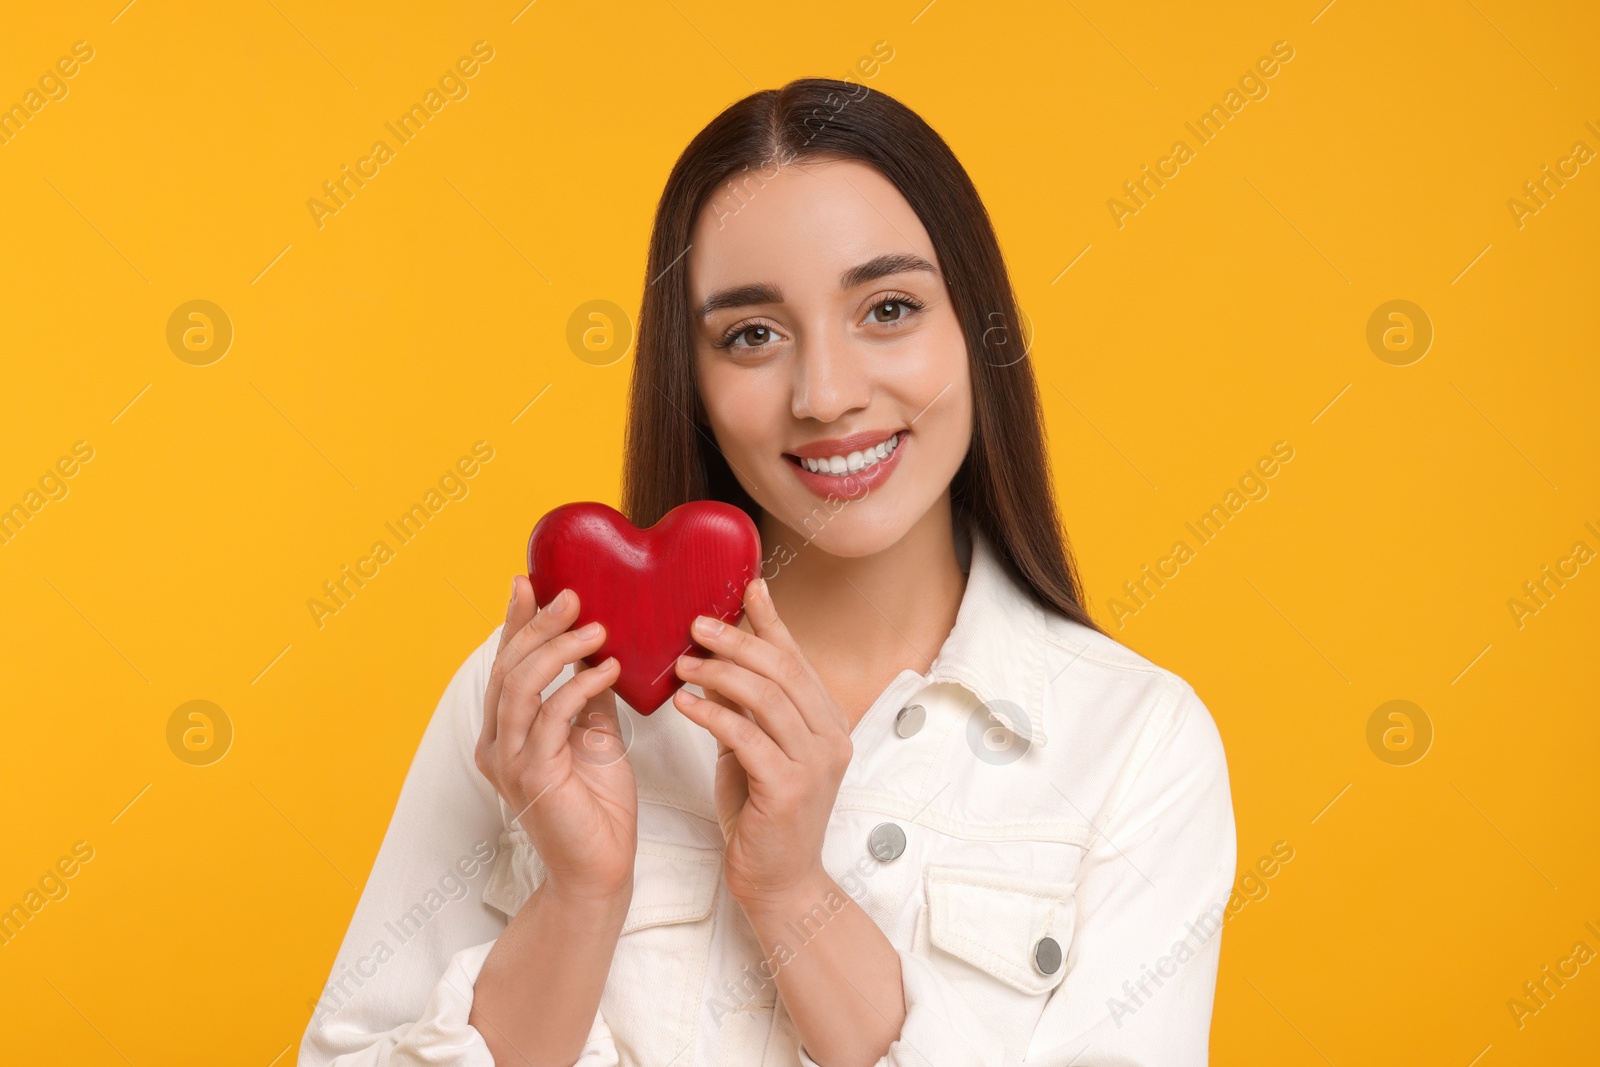 Photo of Happy young woman holding decorative red heart on yellow background